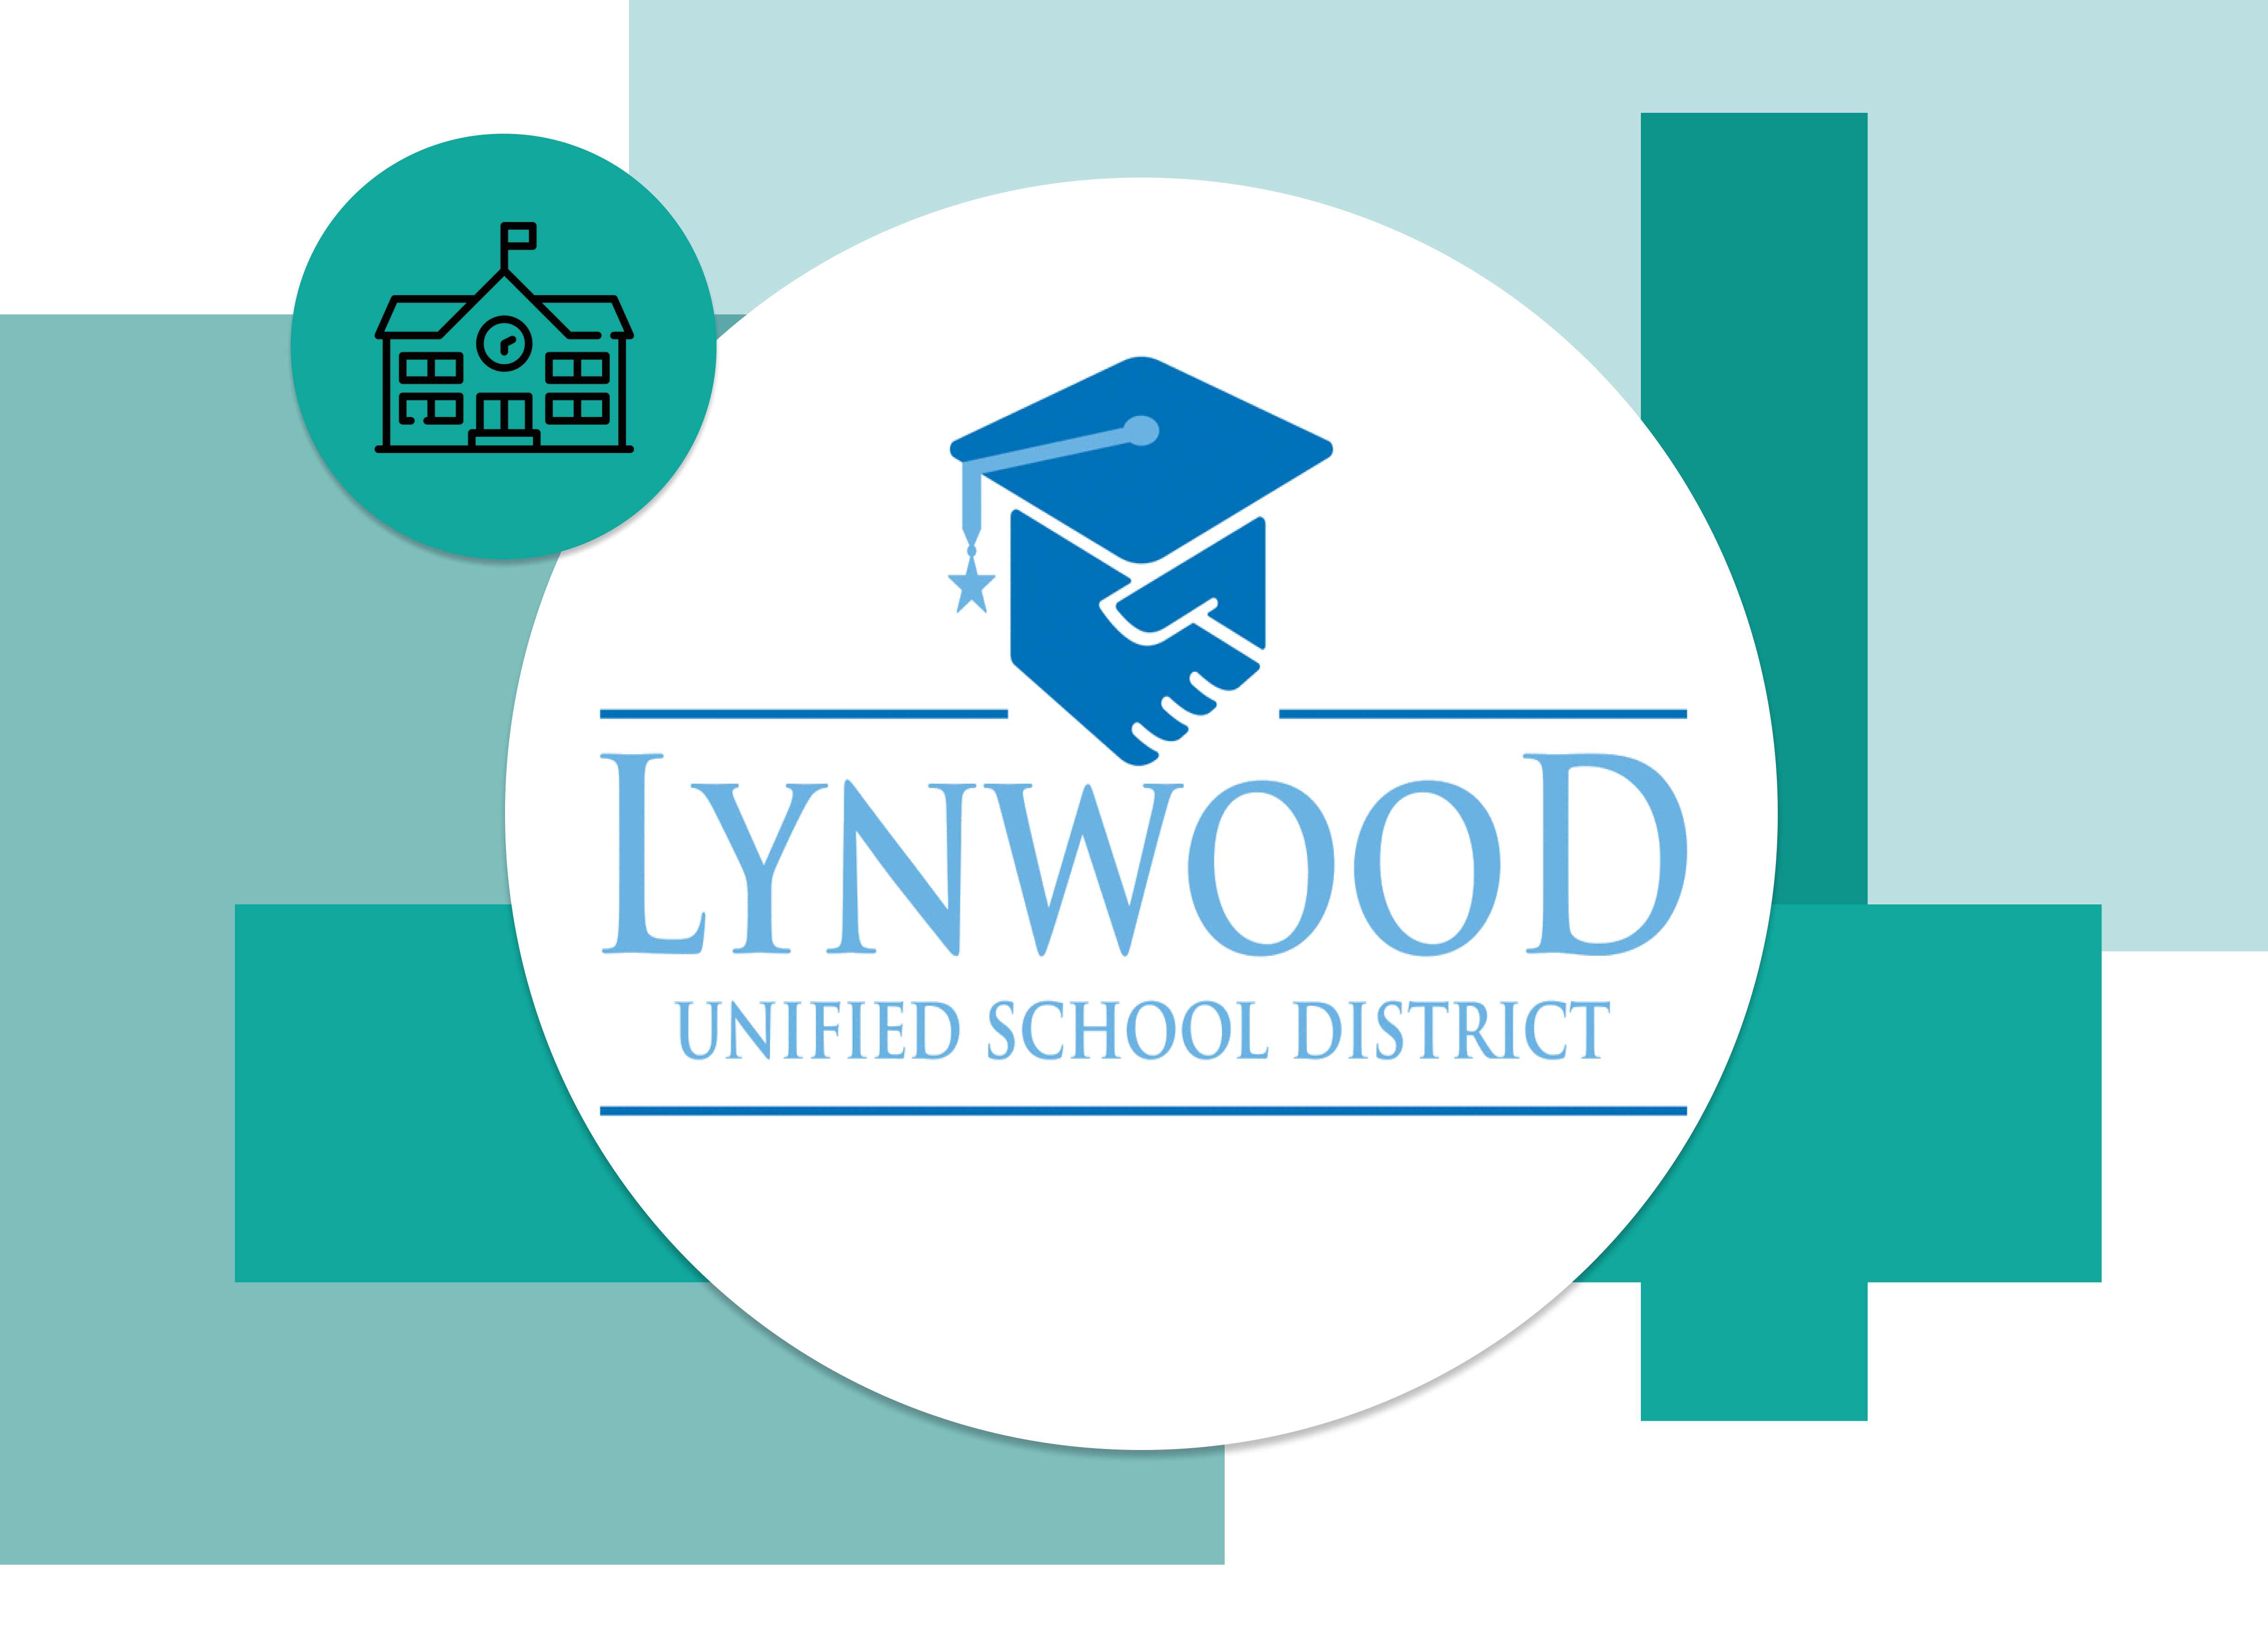 Lynwood USD features a creative school website, built and powered by Edlio